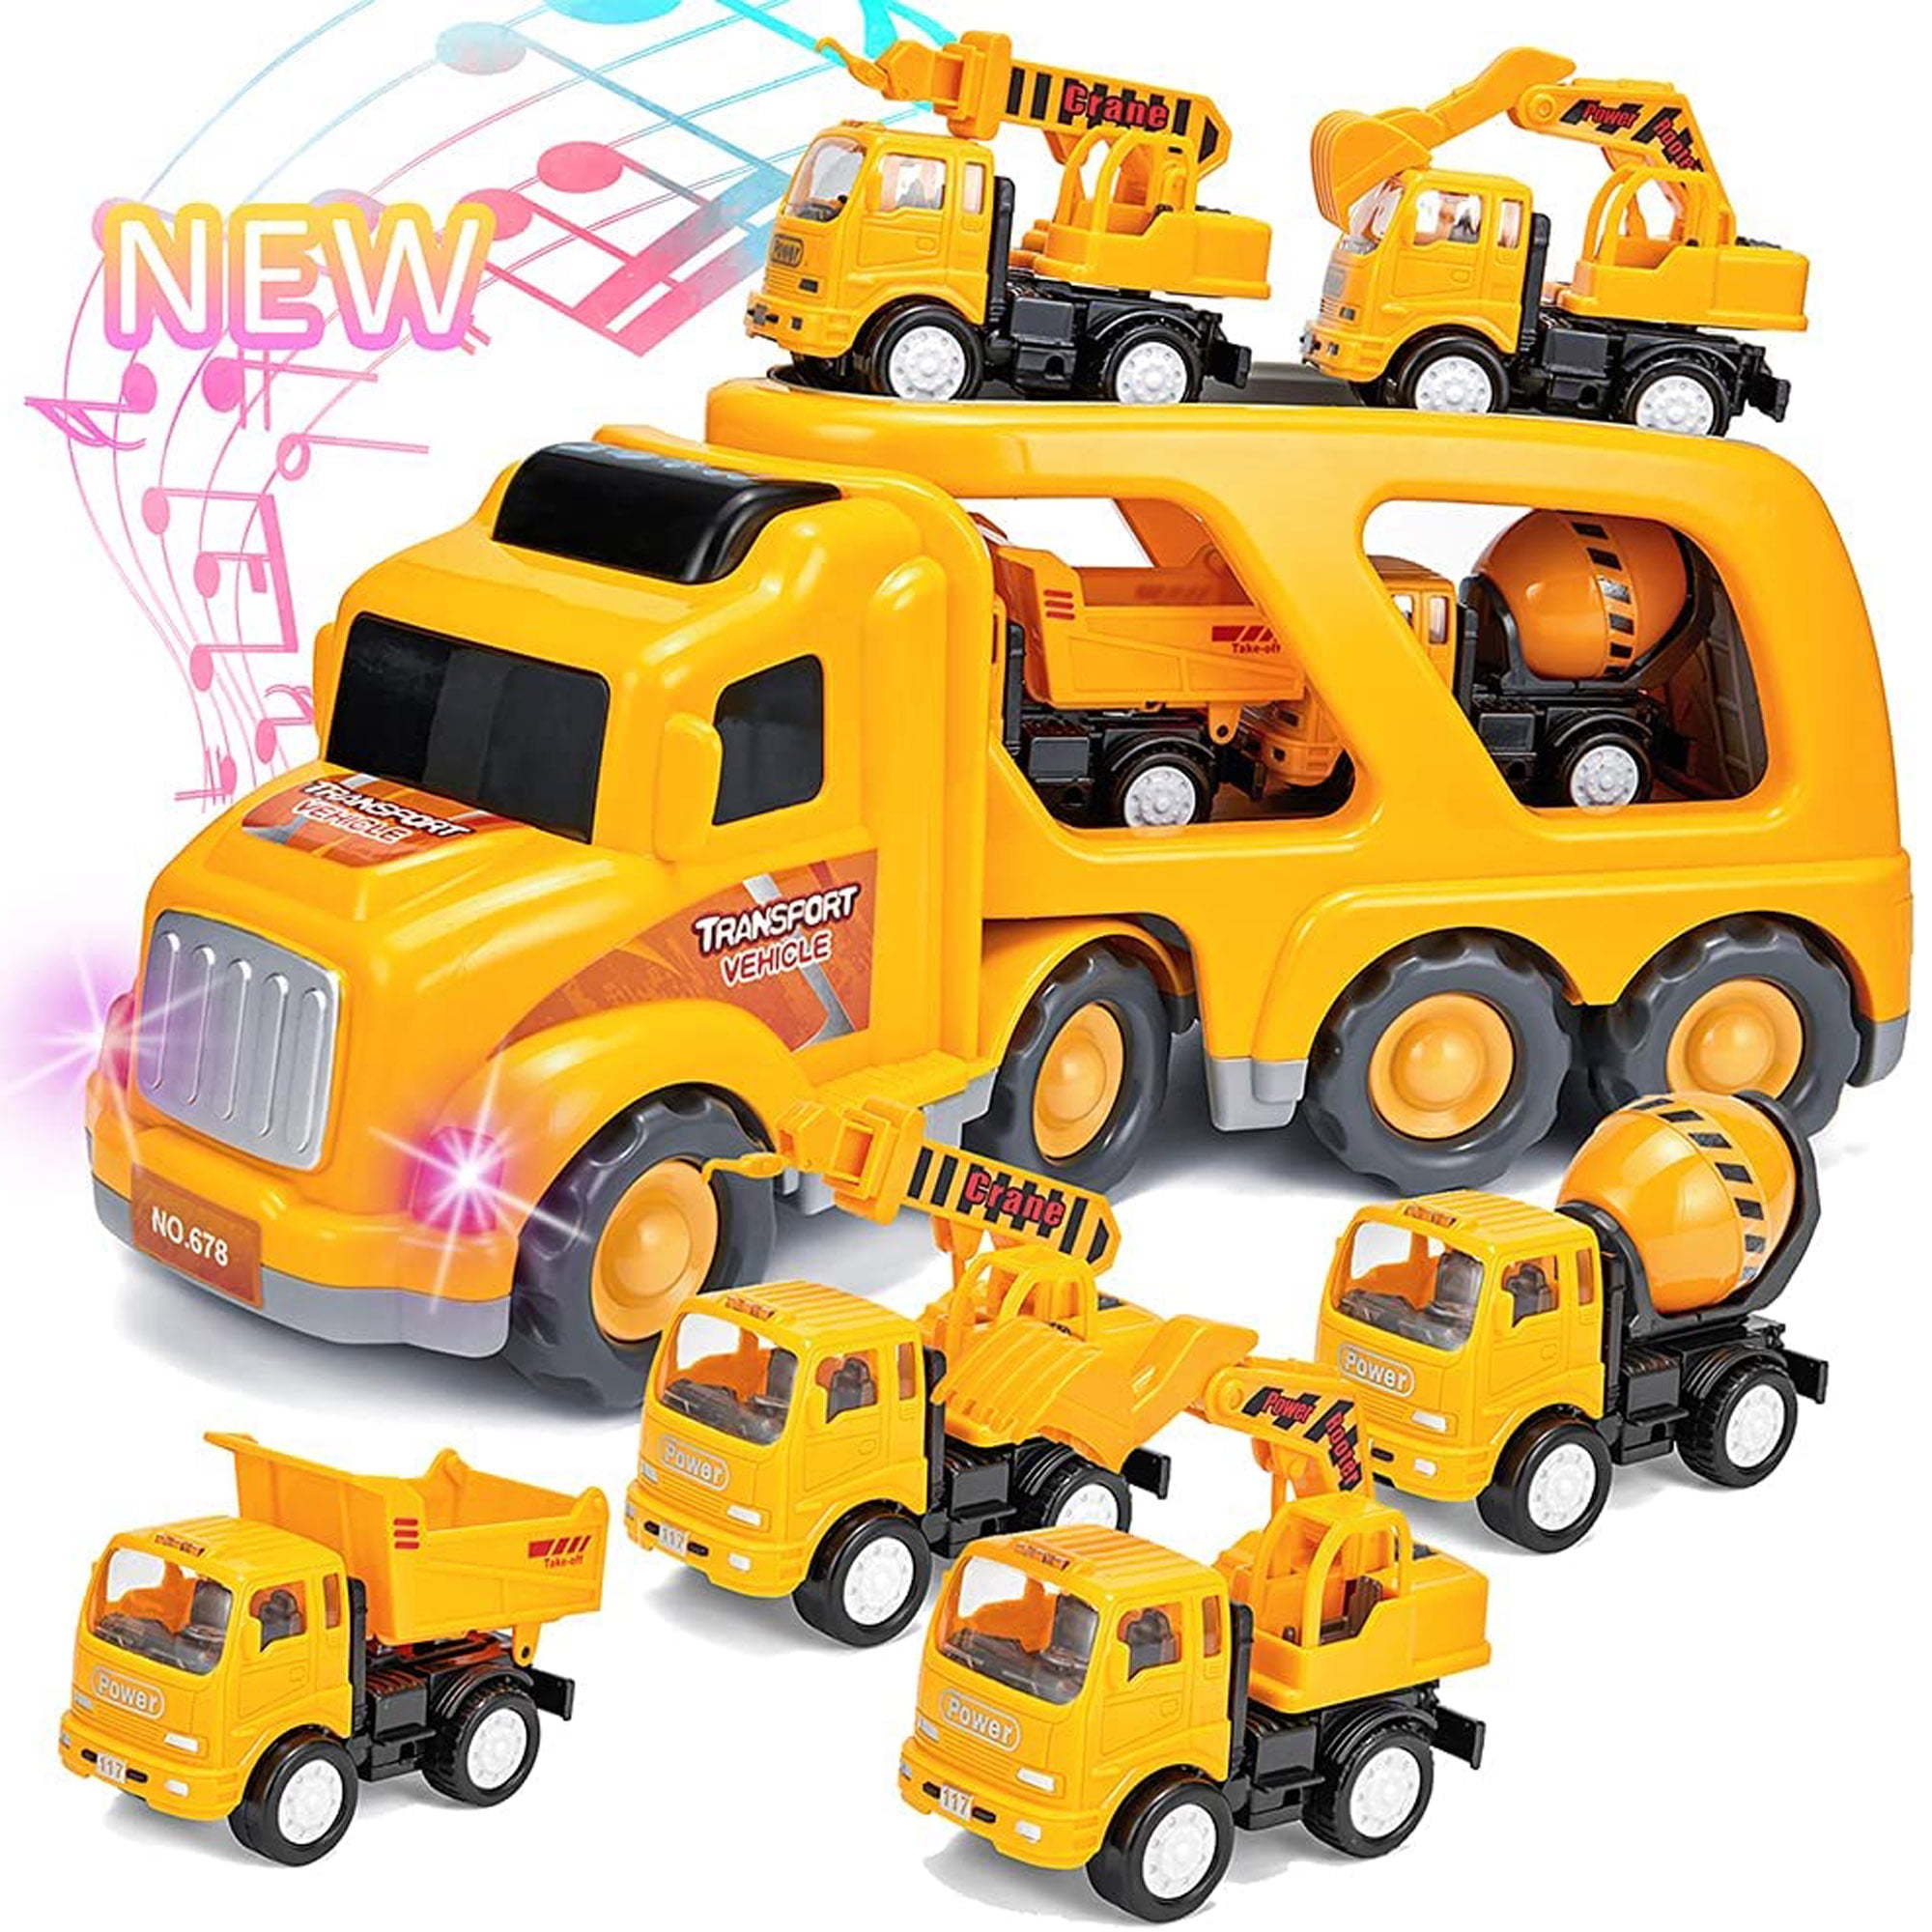 Water Vehicle Contain 1 Large Transport Cargo Truck Cement Mixer 5-in-1 Friction Power Car Toys for 3 4 5 6 Years Old Boys and Girls Loading car Construction Truck Toys Set with Sound and Light